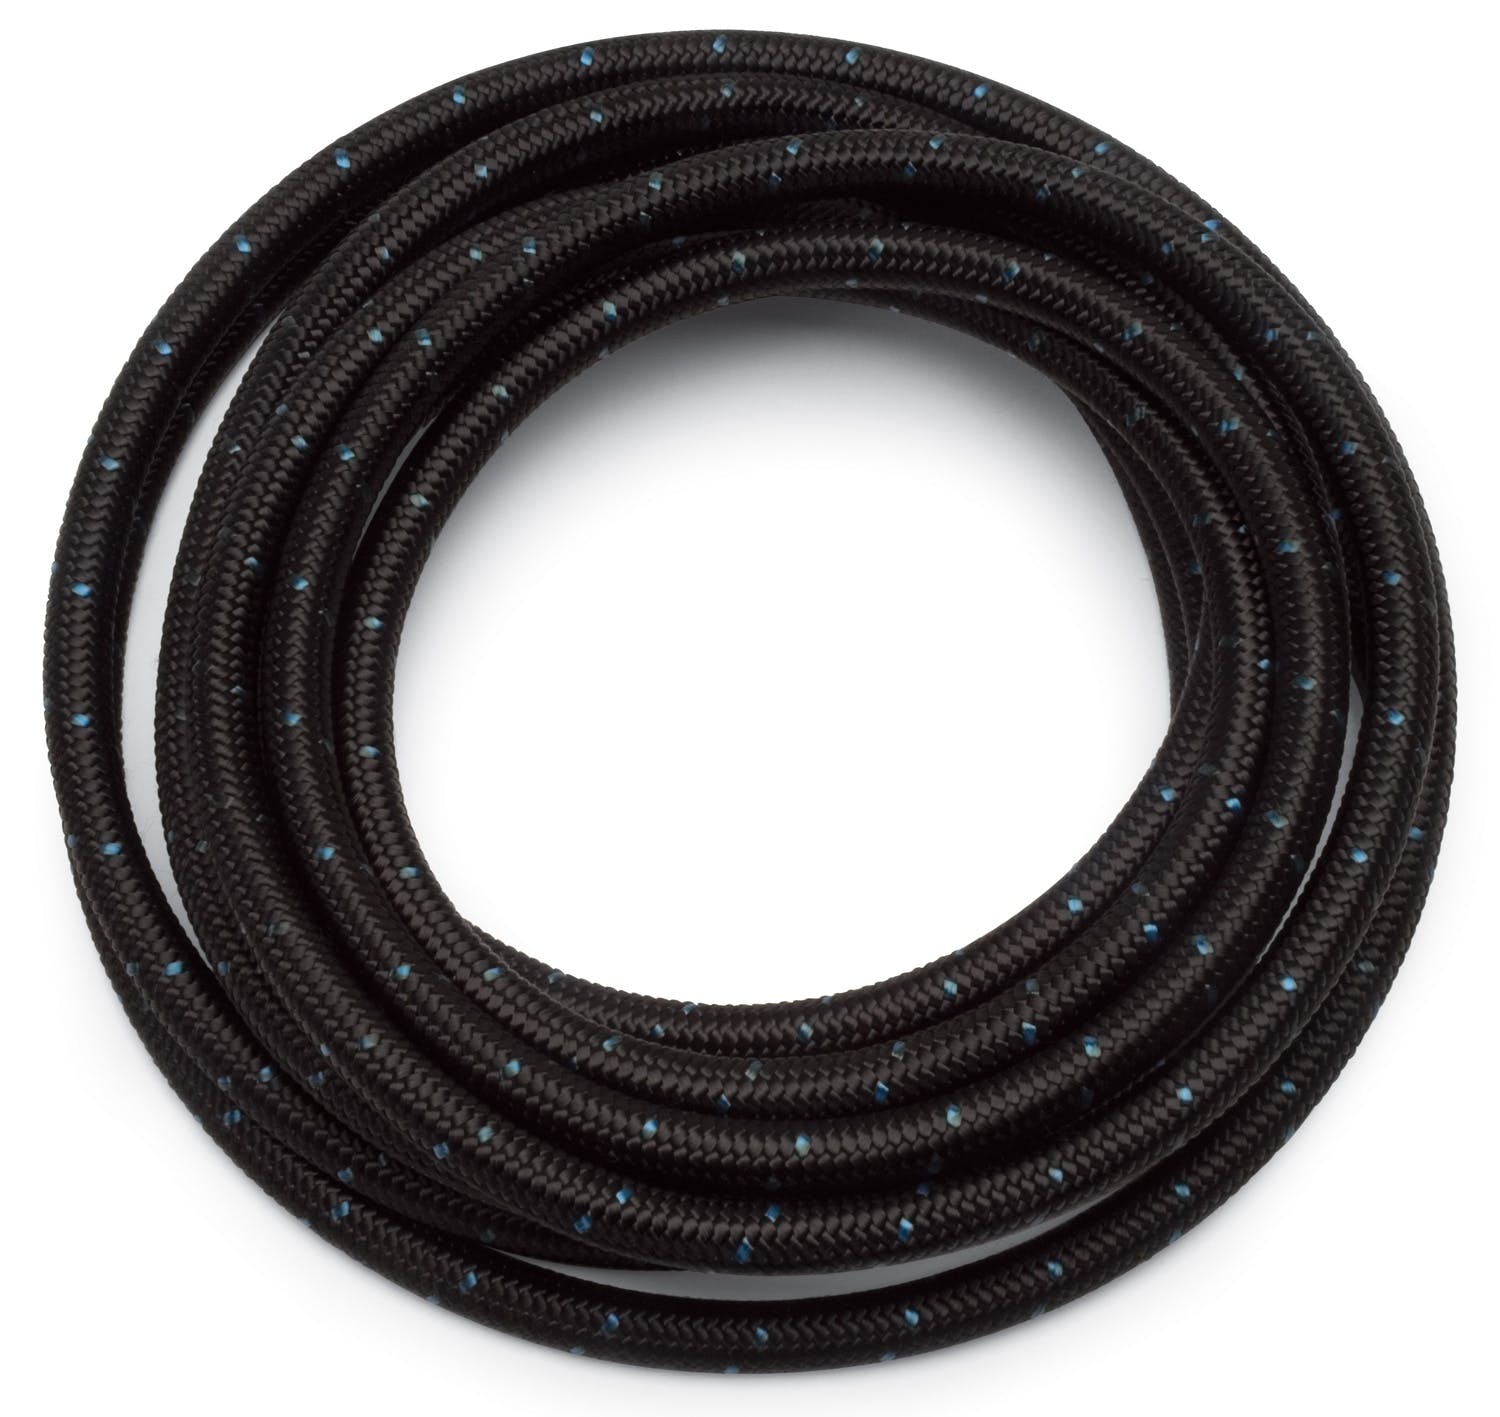 Russell 632093 #6 Black Cloth hose  Blue Tracer  20ft length